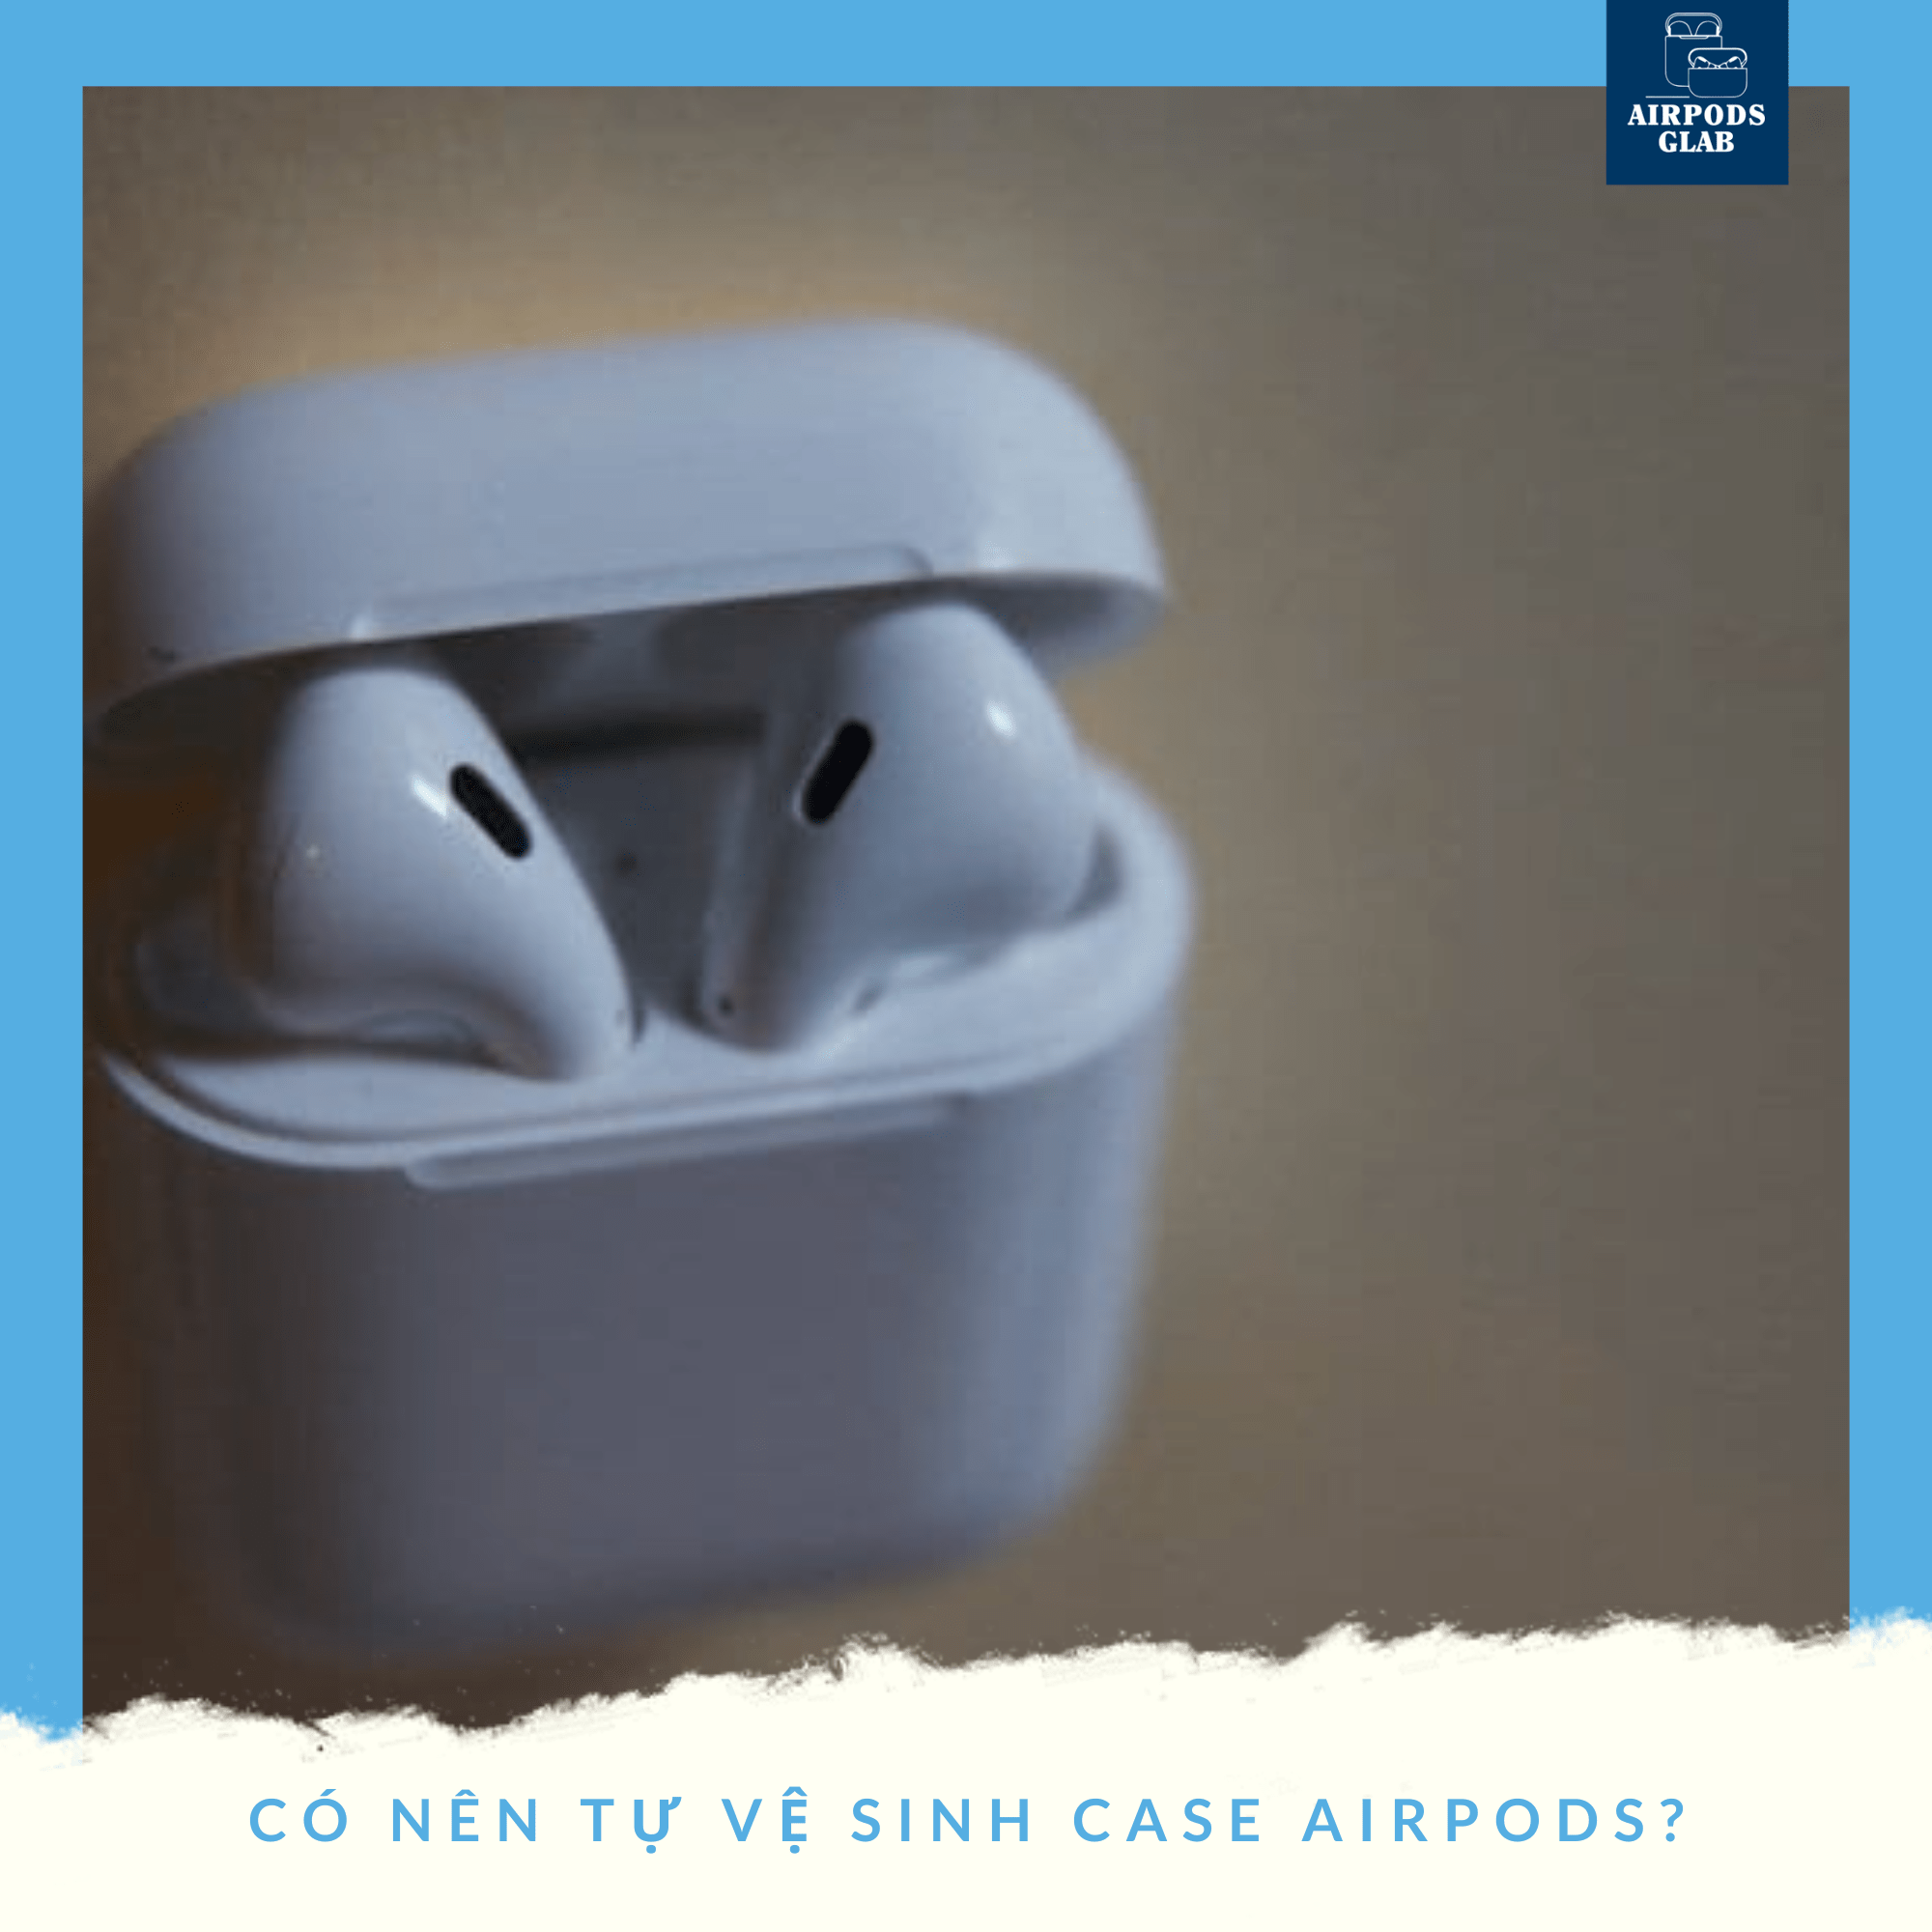 ve-sinh-case-airpods